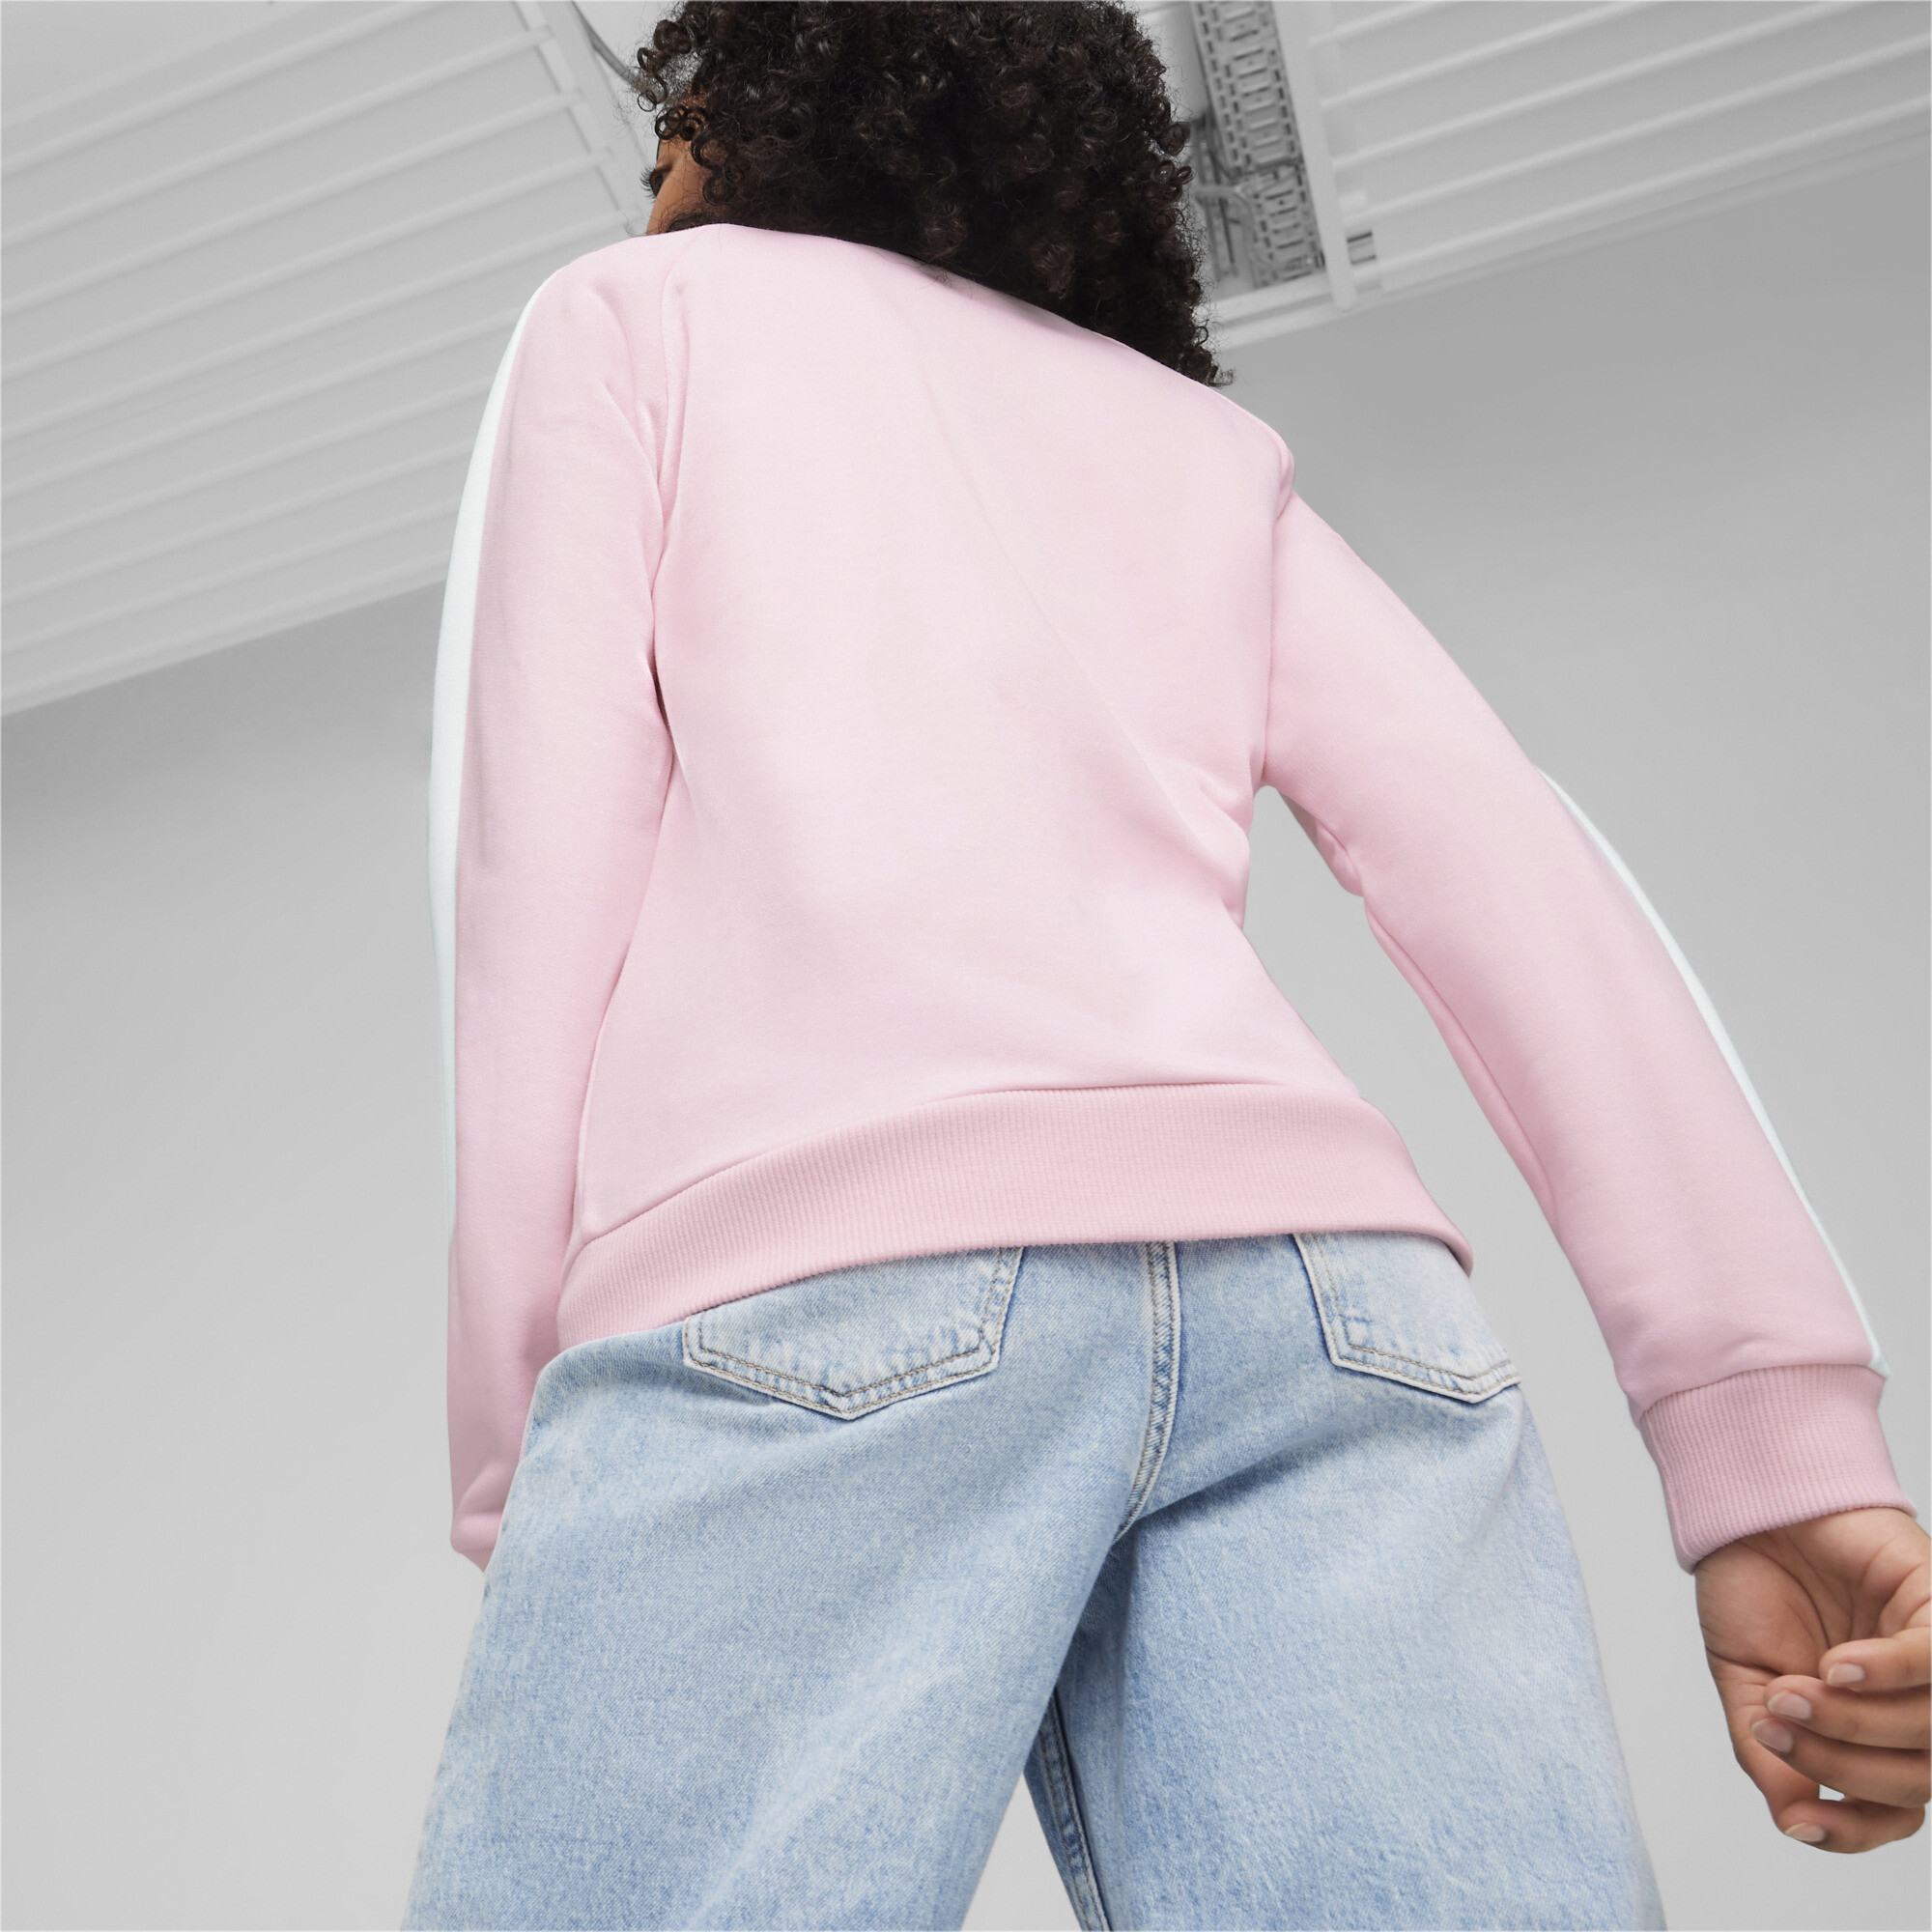 PUMA Classics T7 Track Jacket In Pink, Size 13-14 Youth